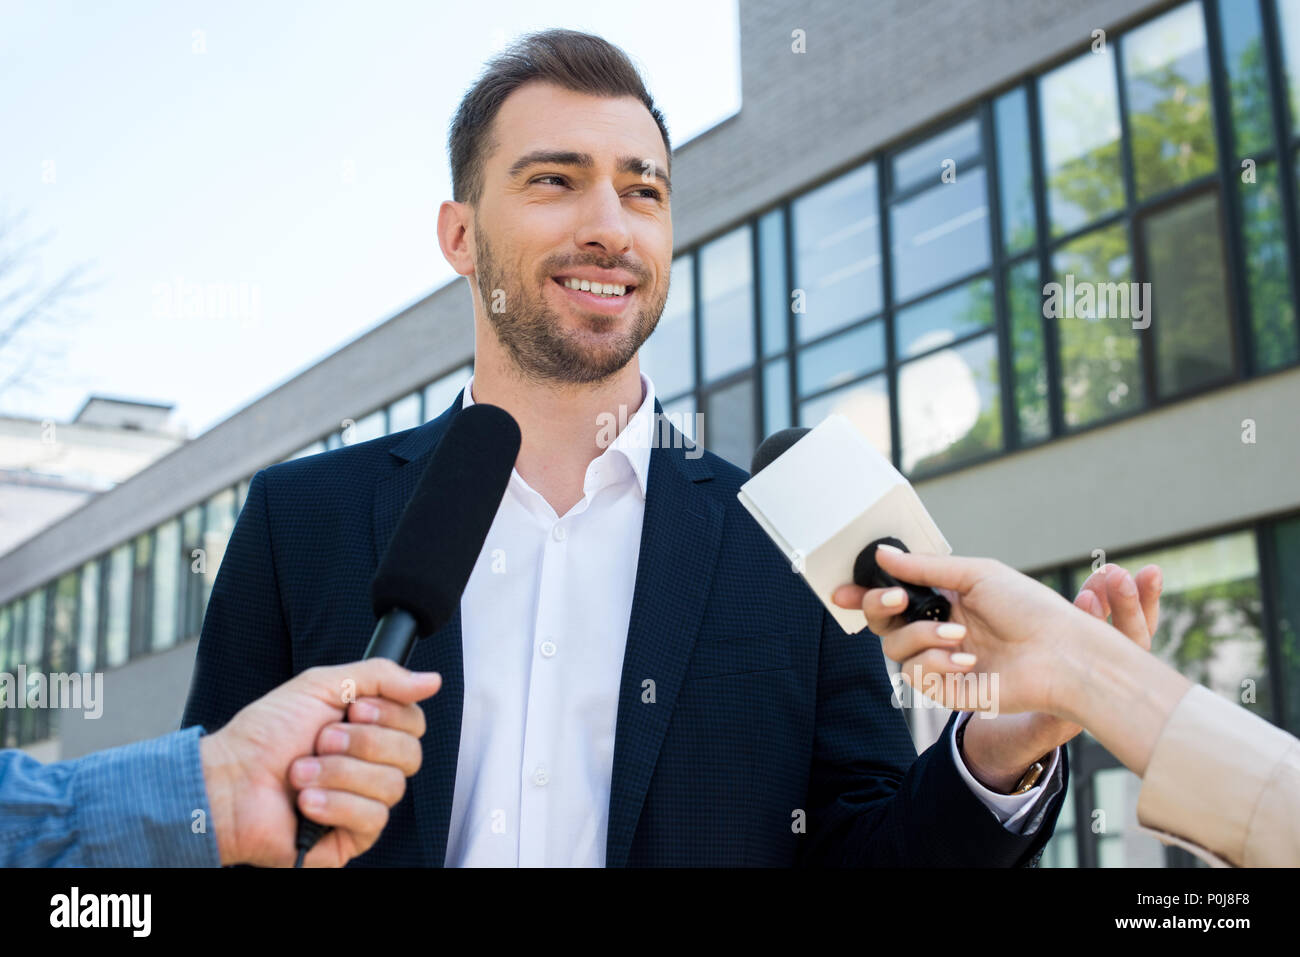 two journalists interviewing successful businessman with microphones Stock Photo